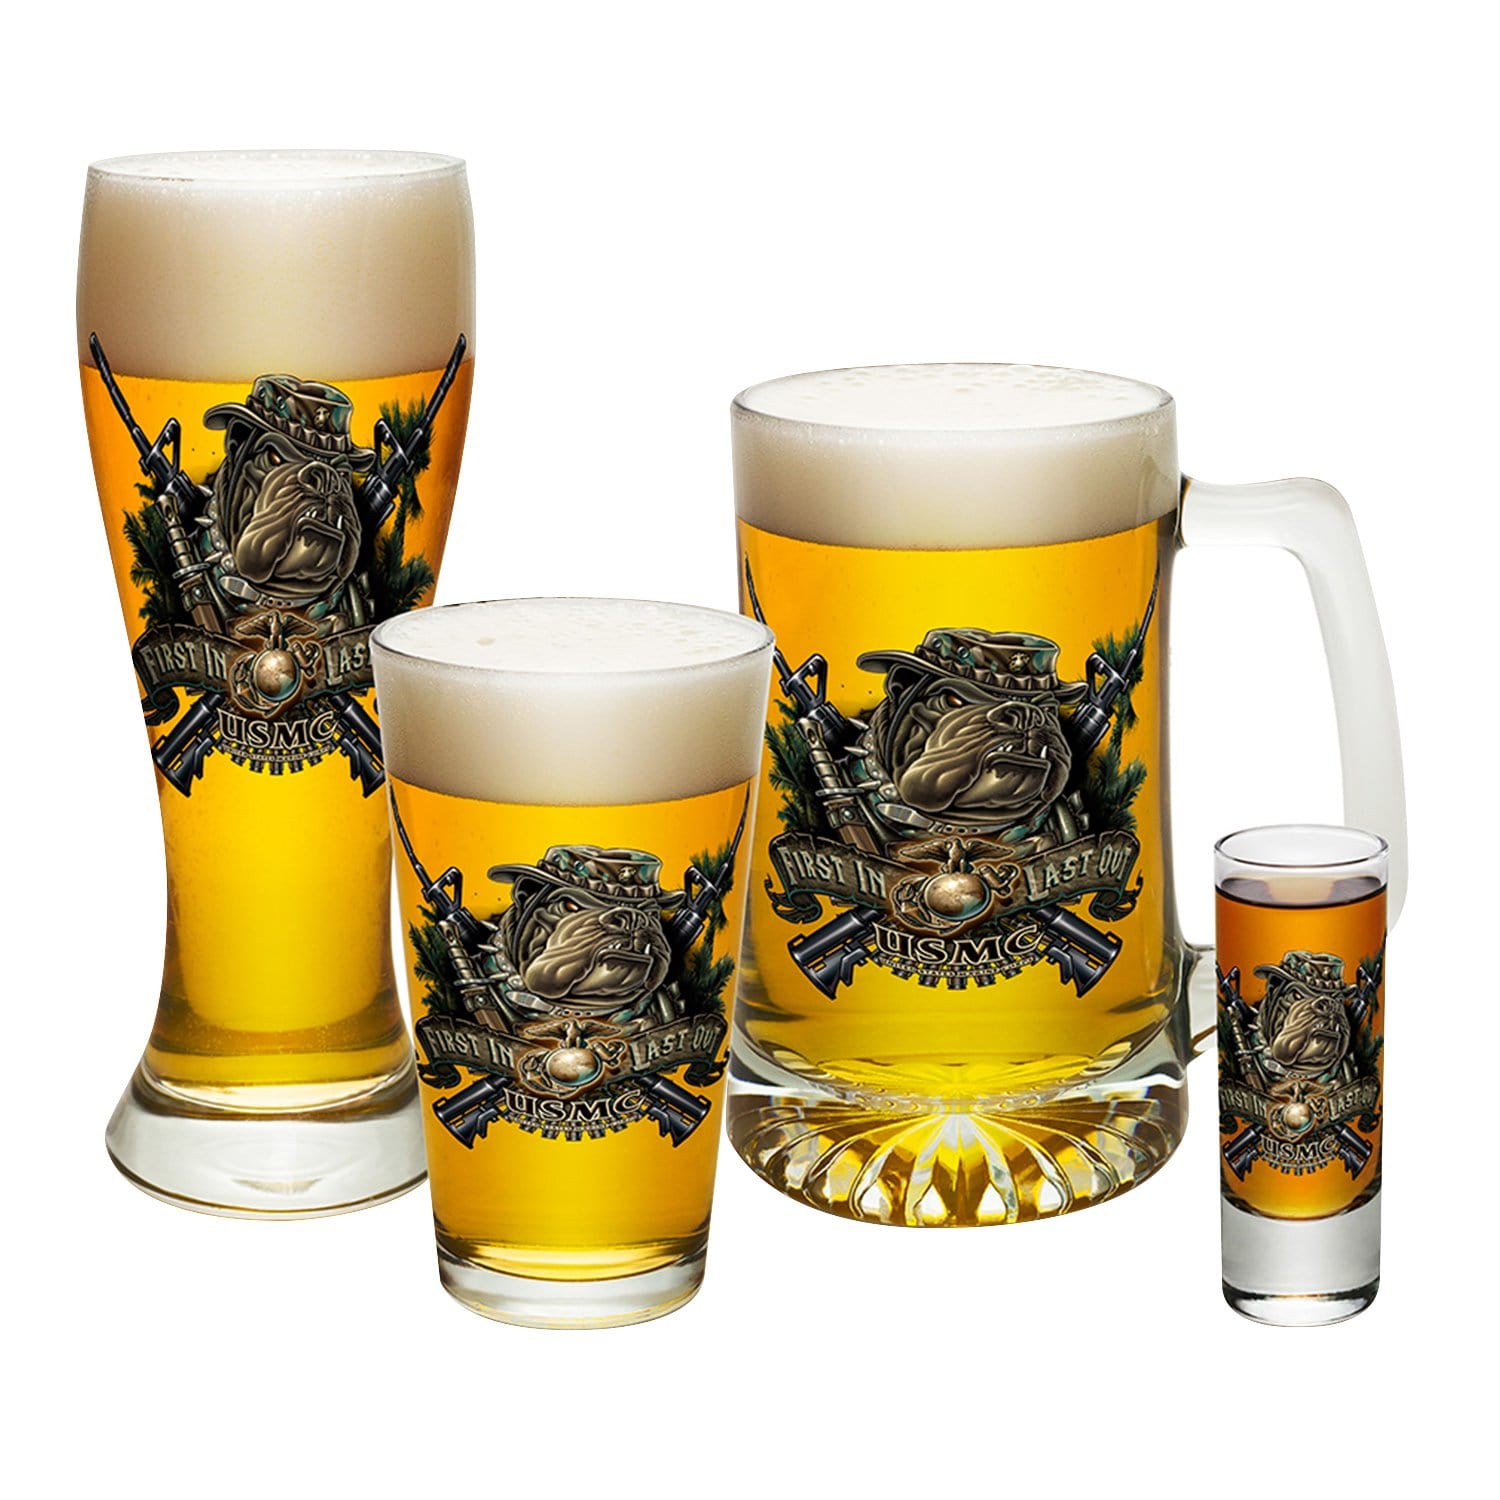 Marine Devil Dog First In Last Out 4 PC. Glass Set